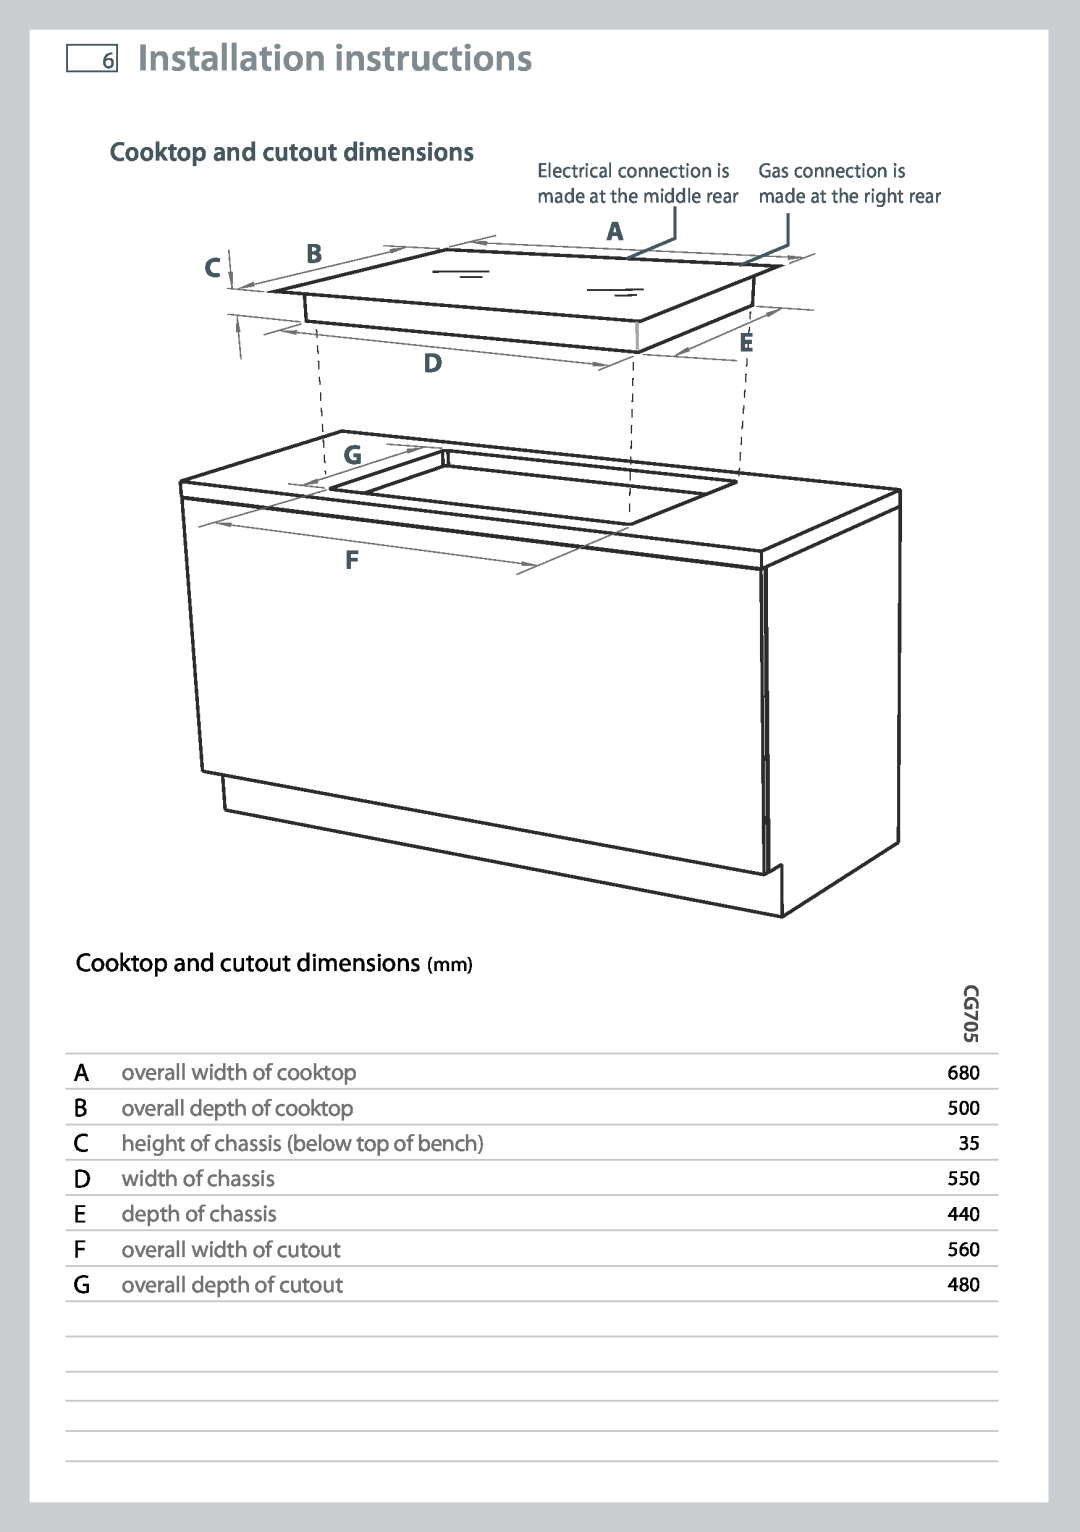 Fisher & Paykel CG705 Installation instructions, Cooktop and cutout dimensions, A C B E, G F, overall width of cooktop 